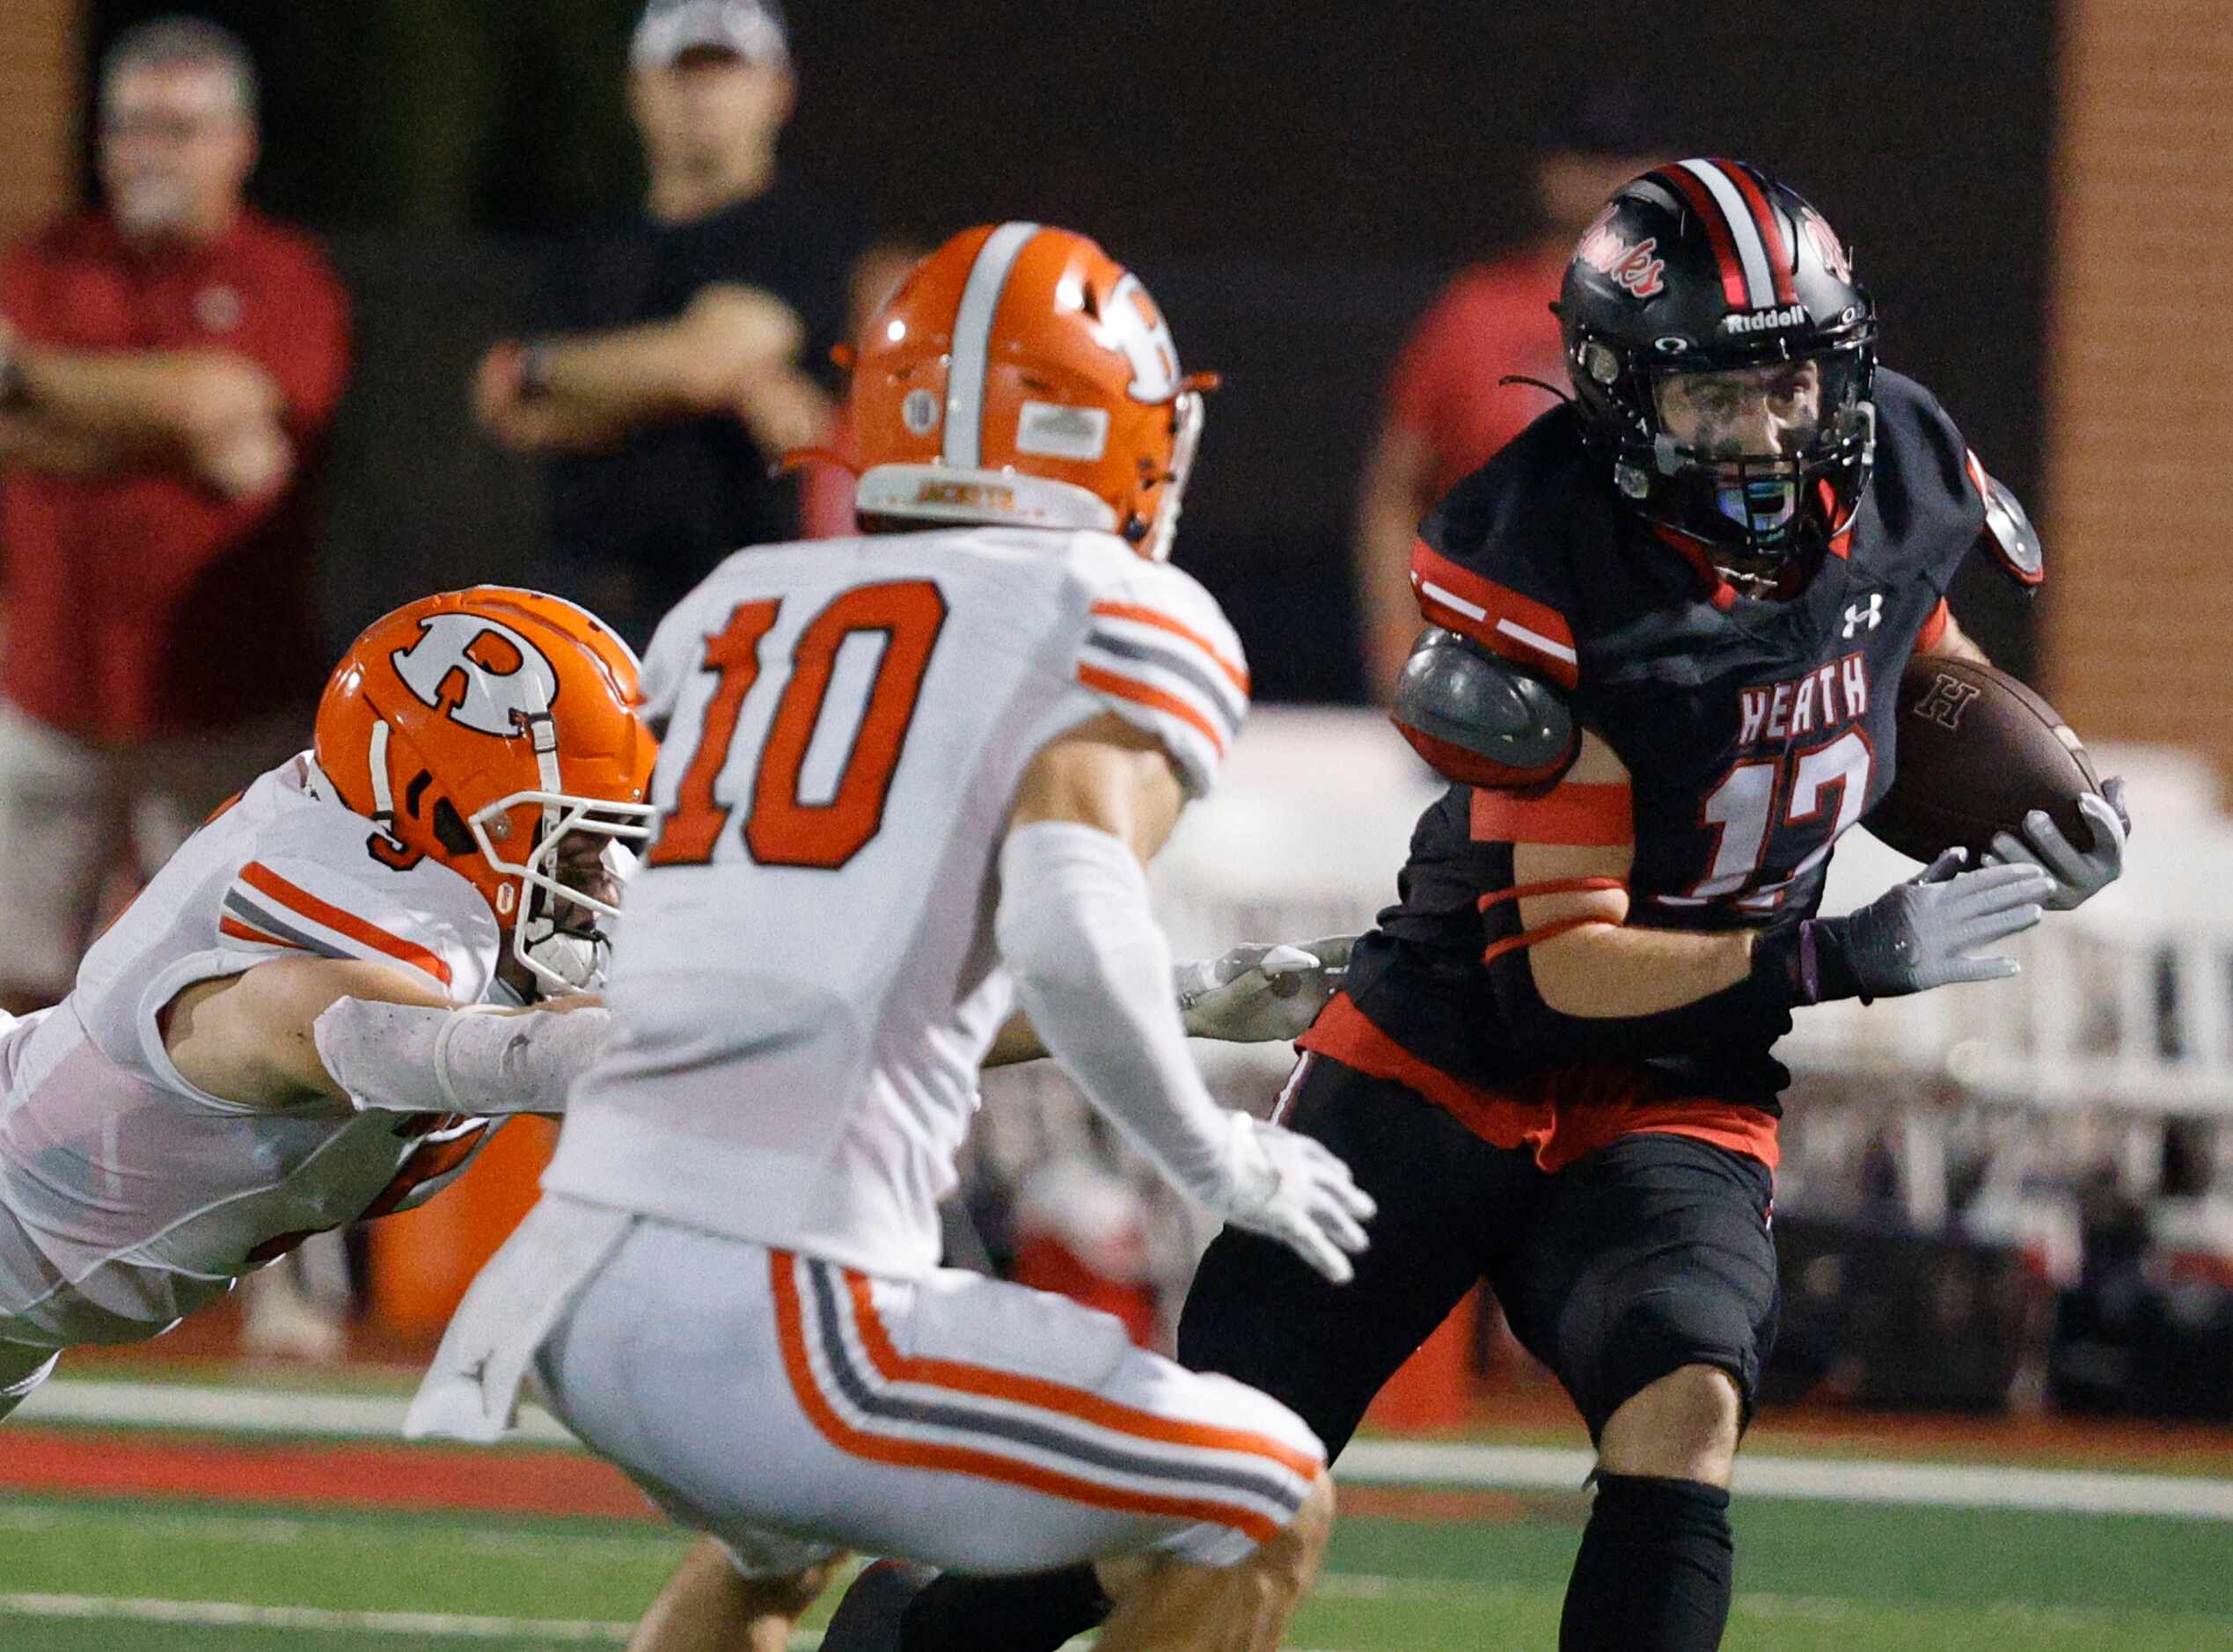 Rockwall-Heath's Jack Davenport (17) carries the ball as Rockwall's Tanner Hart (5) and...